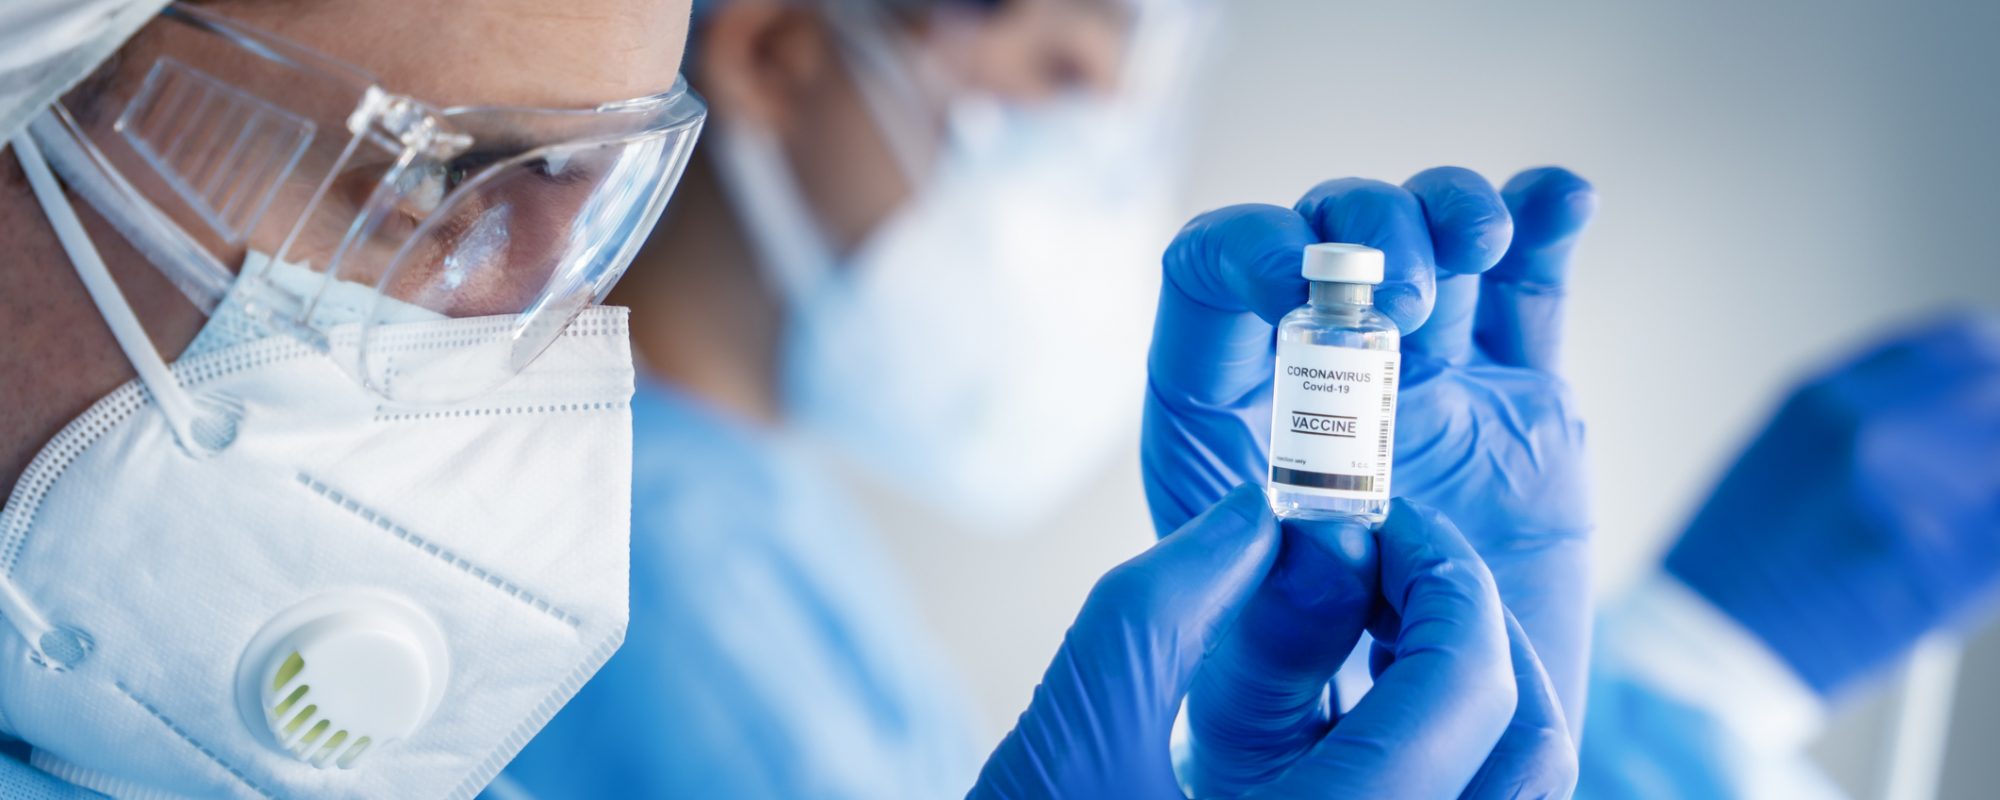 coronavirus covid-19 vaccine bottle in hands of pharmacuetical and vaccine research scientist in laboratory, coronavirus covid-19 vaccine development